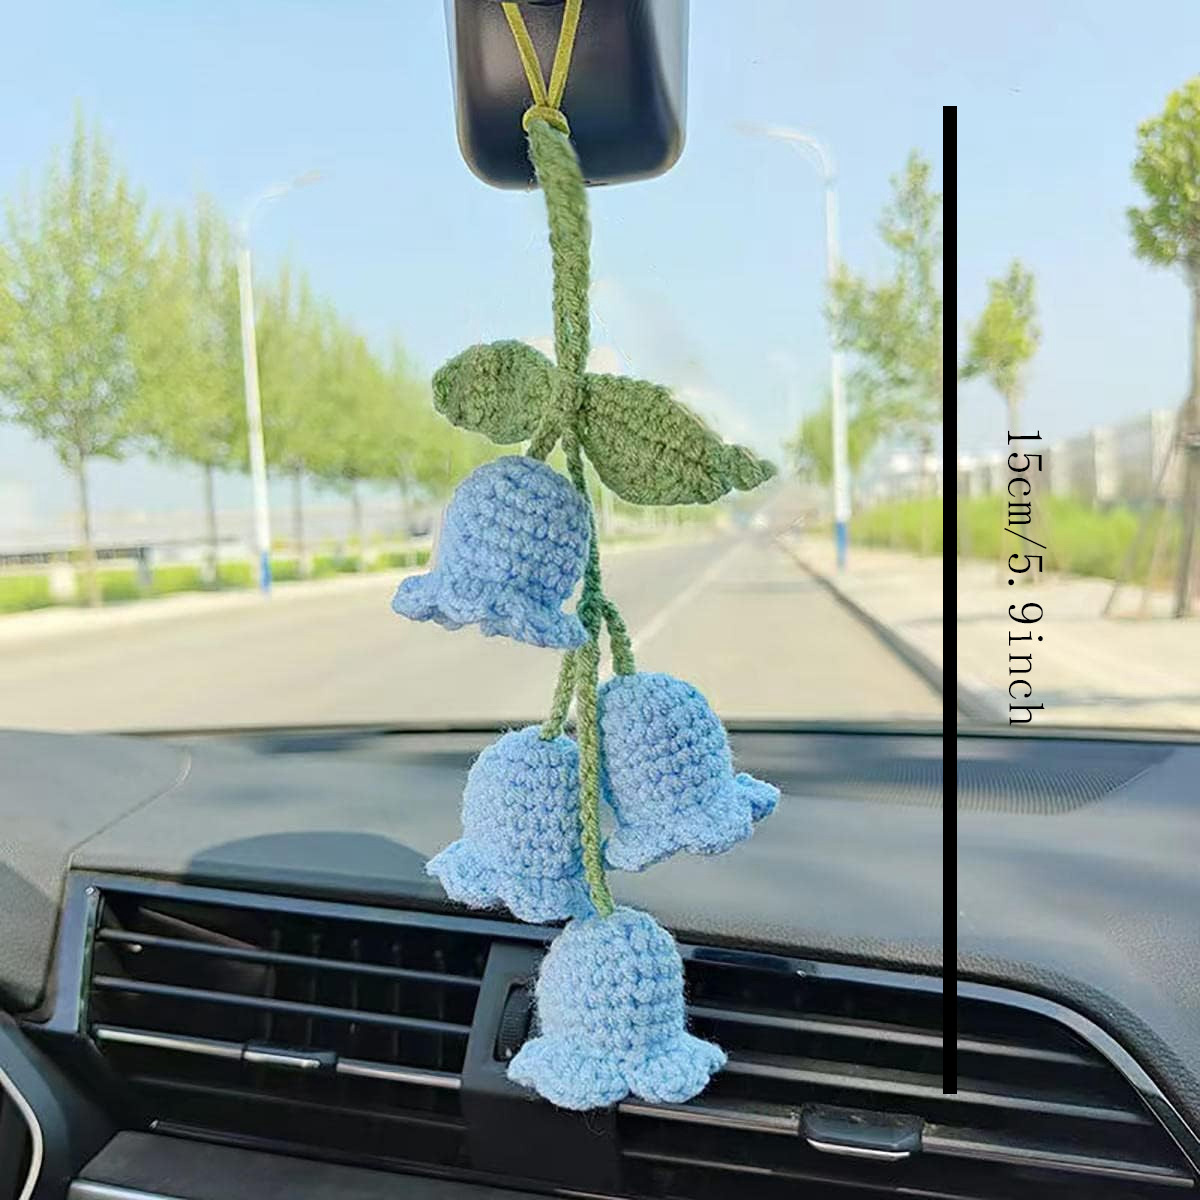 Puppy Lovers Car Rear View Mirror Accessories Car Ornament Hanging Charm  Interior Rearview Pendant Decor